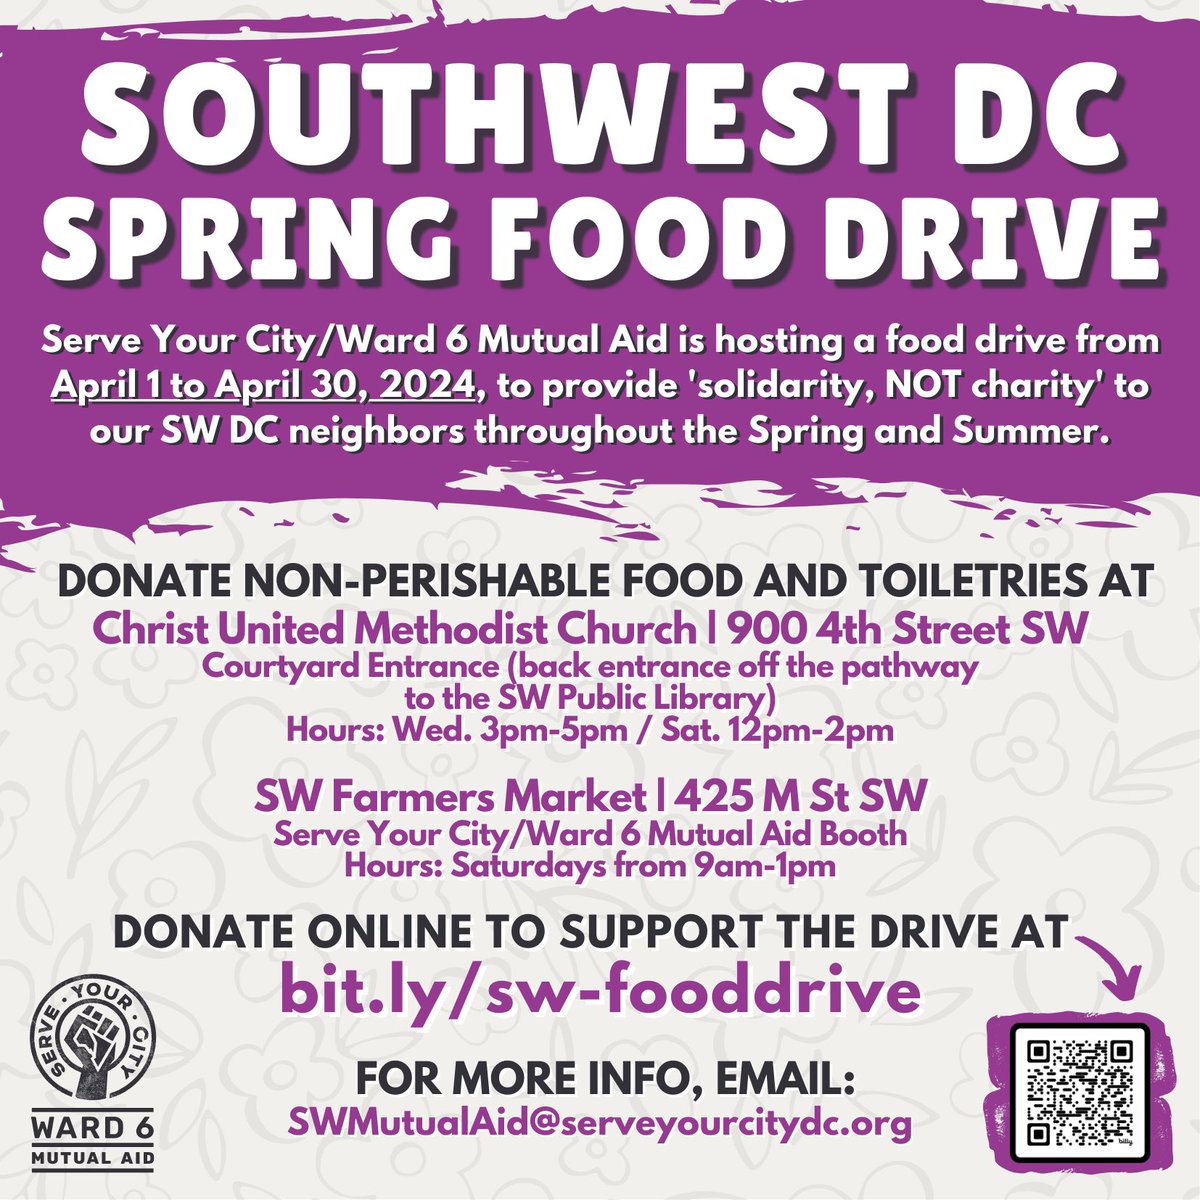 ‼️ NOW UNTIL APRIL 30: Join us in showing #solidarityNOTcharity by donating to #ServeYourCityDC/#Ward6MutualAid’s SW #DC Spring #FoodDrive! ➡️ Check out the attached flyer for details on helping your #SWDC neighbors this Spring & Summer! ➡️ bit.ly/sw-fooddrive.